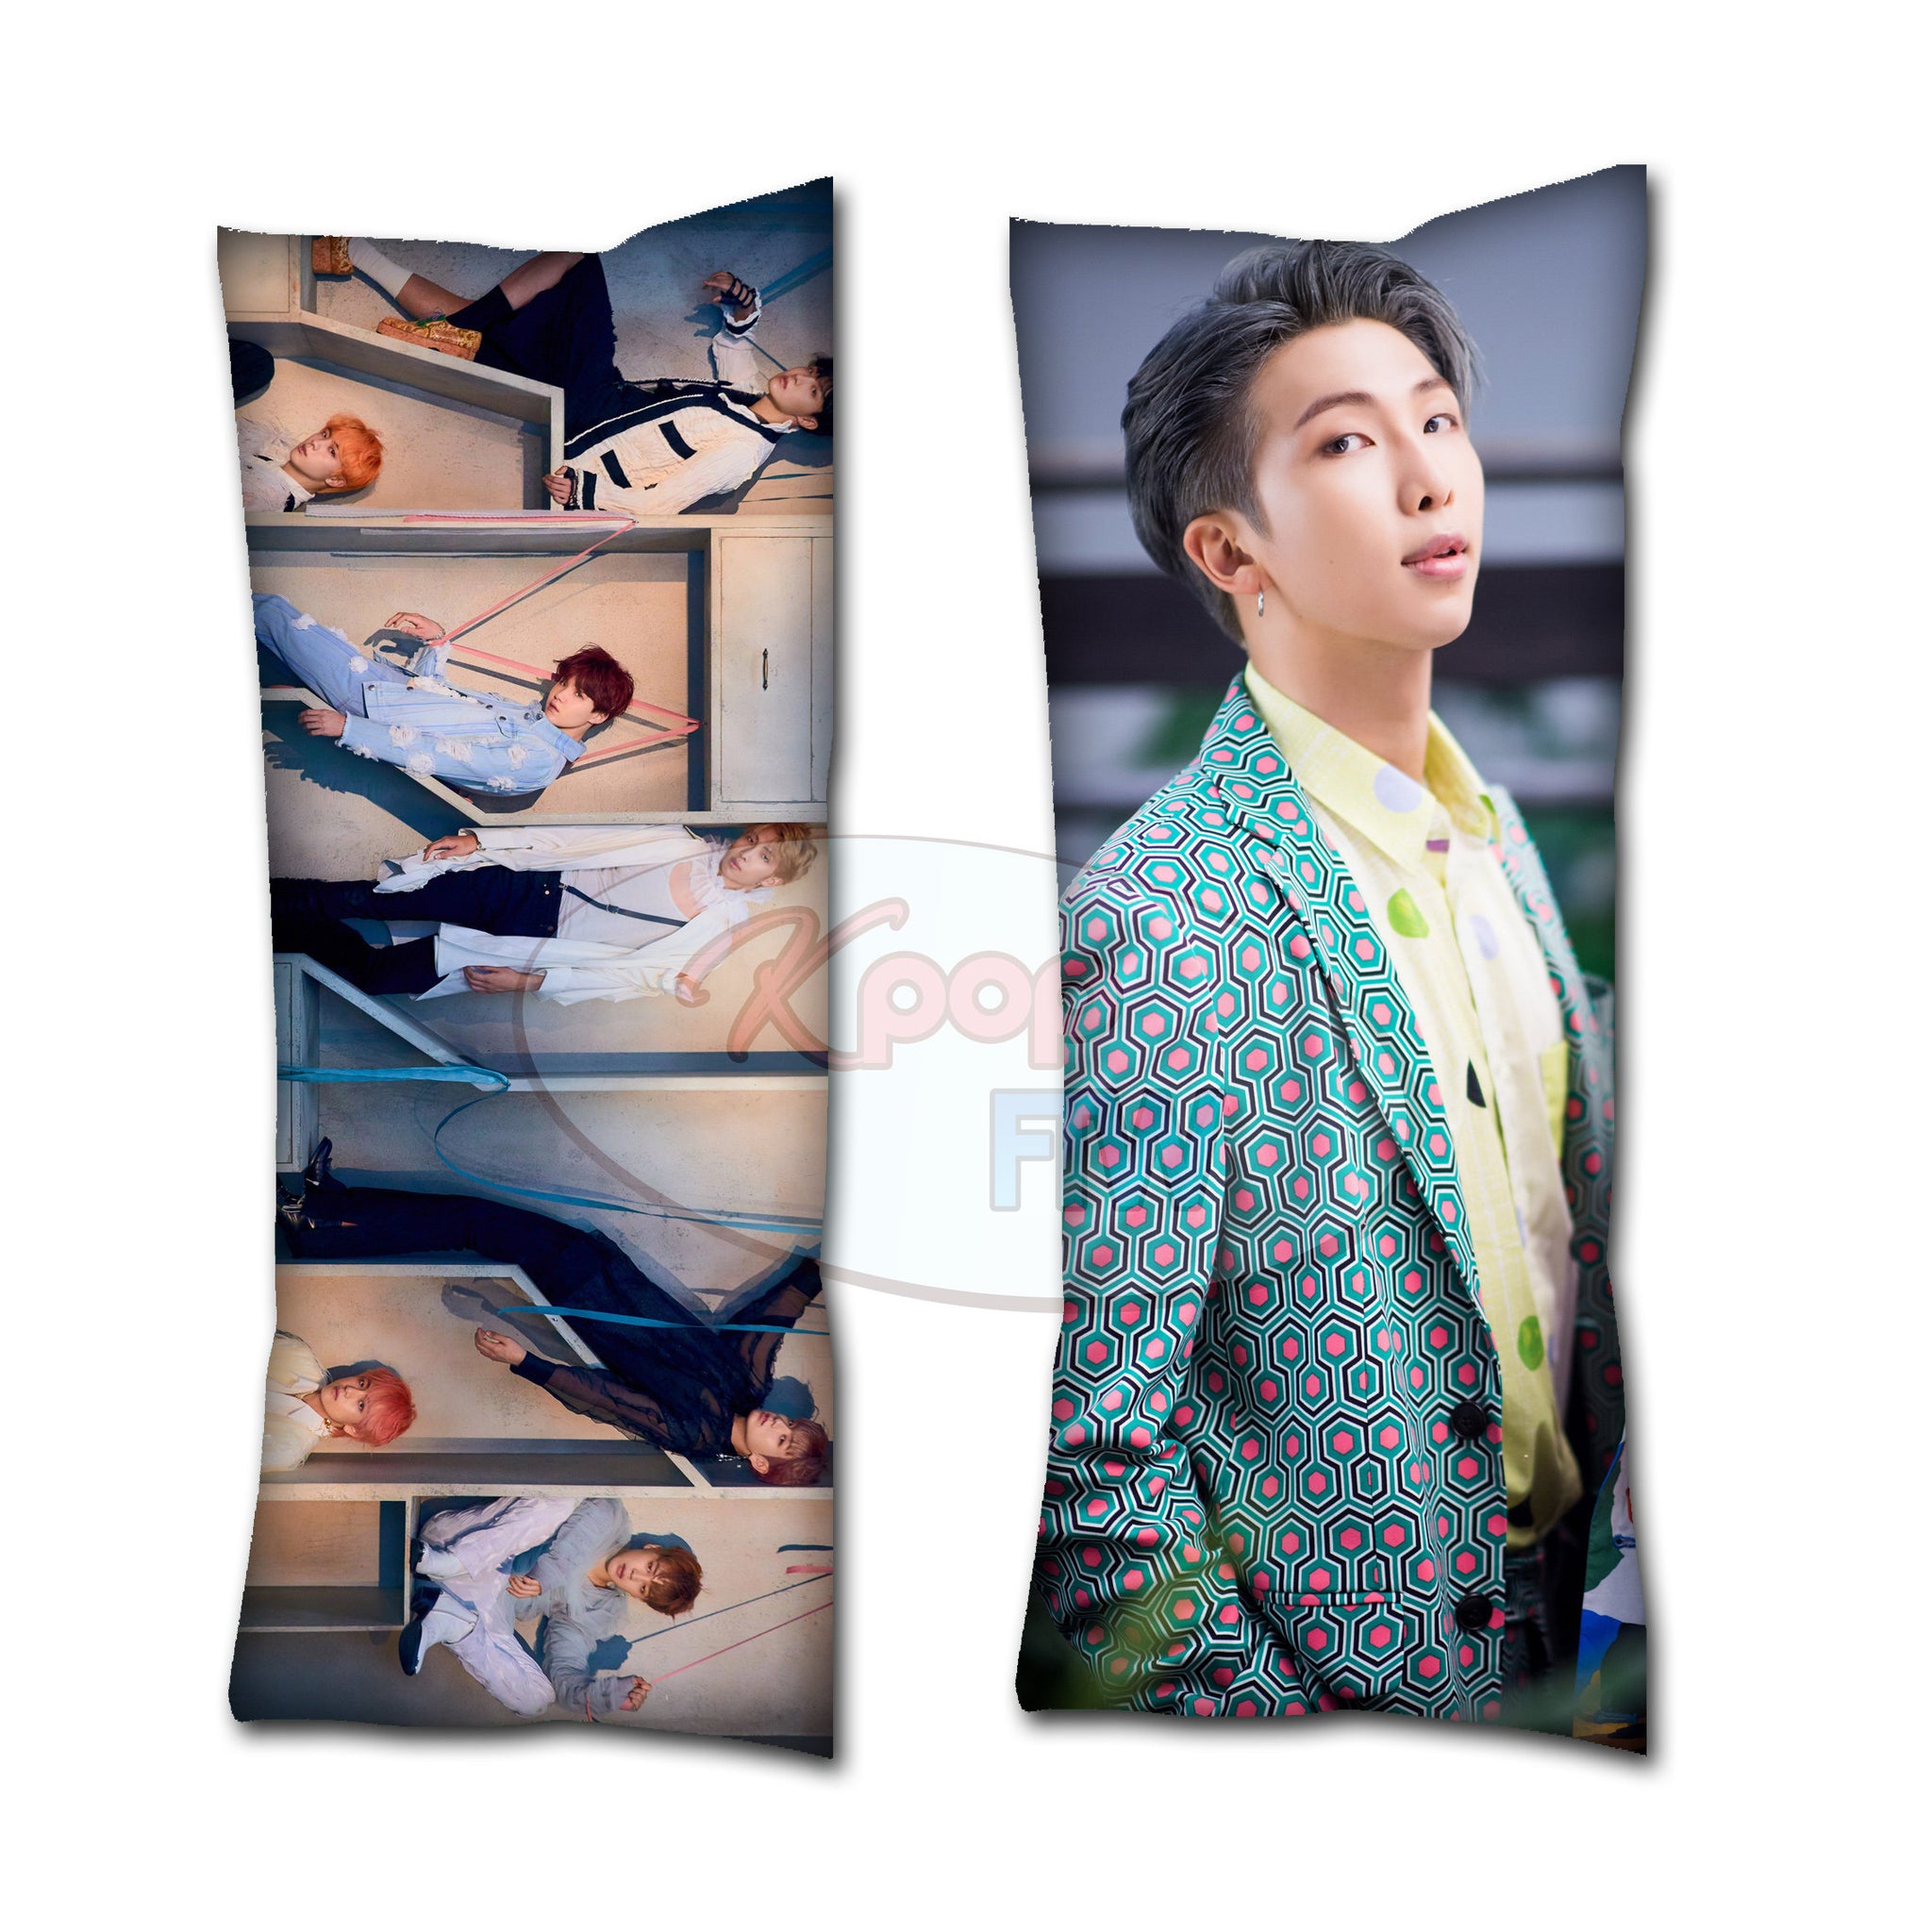 BTS You Never Walk Alone Jimin Body Pillow- Buy Now Cosplay-FTW